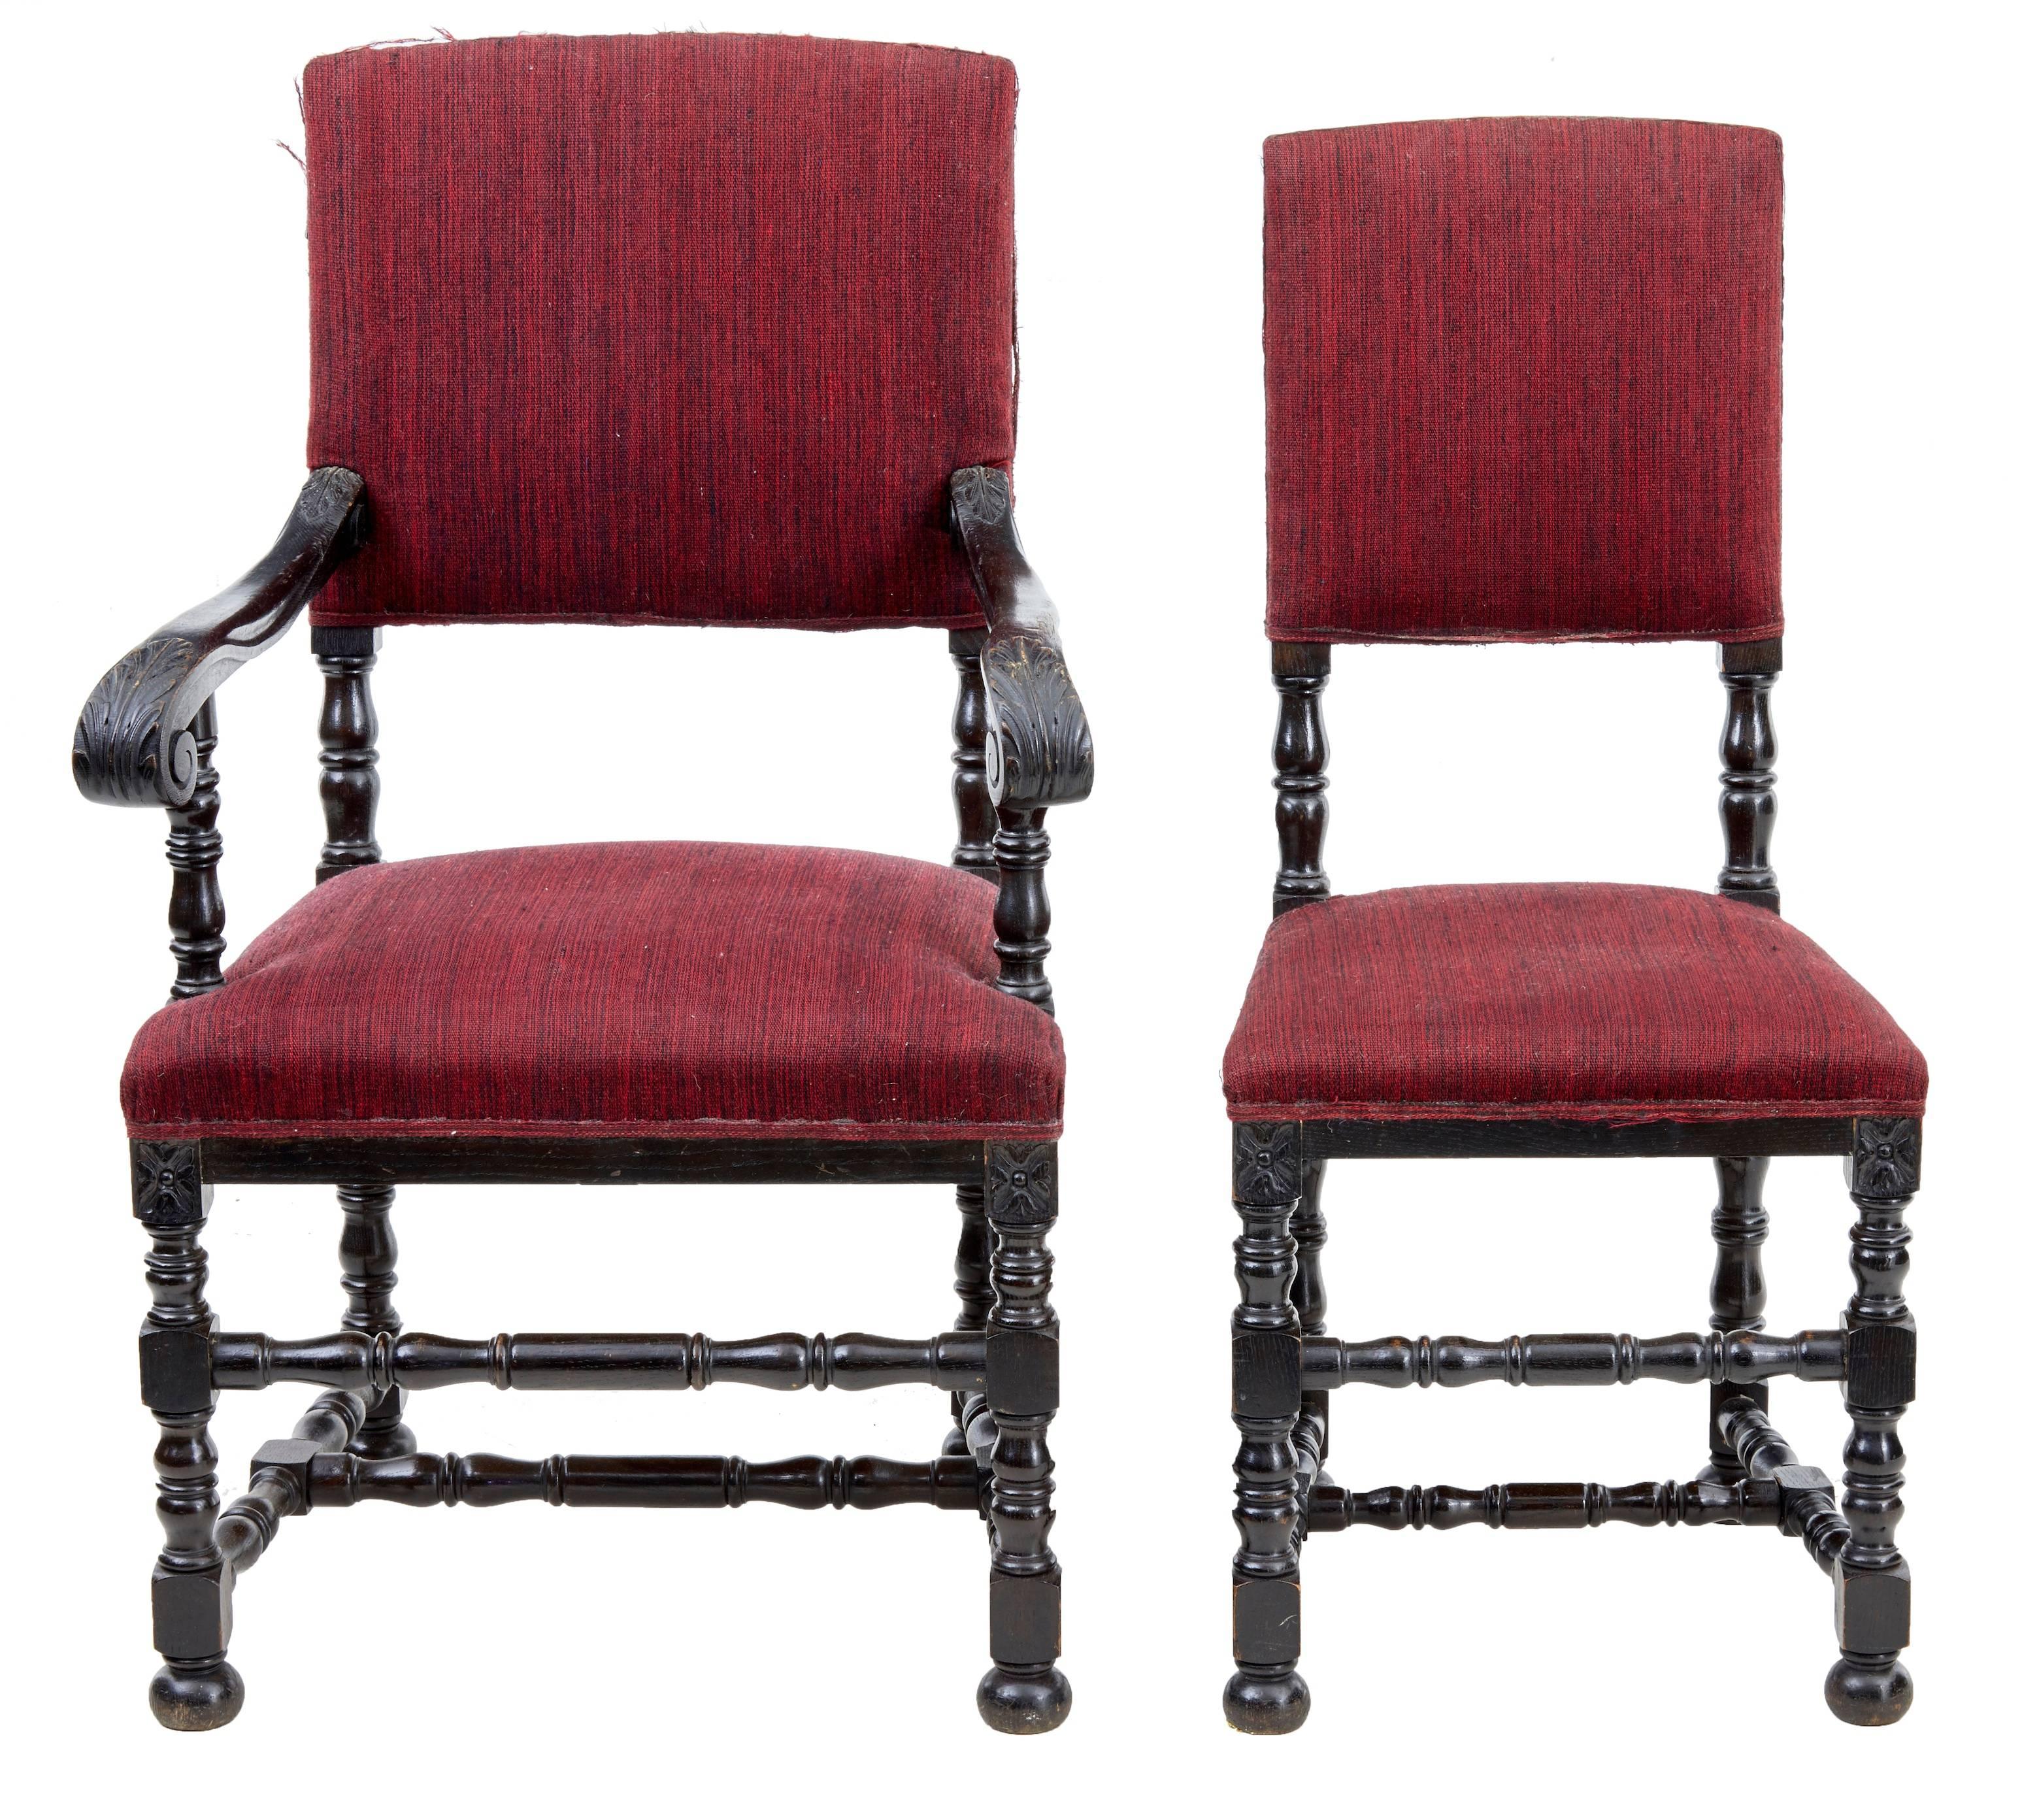 Large set comprising of ten single dining chairs and two carver armchairs.
Stained a very dark oak color.
Standing on turned legs and united by turned stretchers.
Upholstery covering is frayed and lacking beading on some chairs. Ideal for being